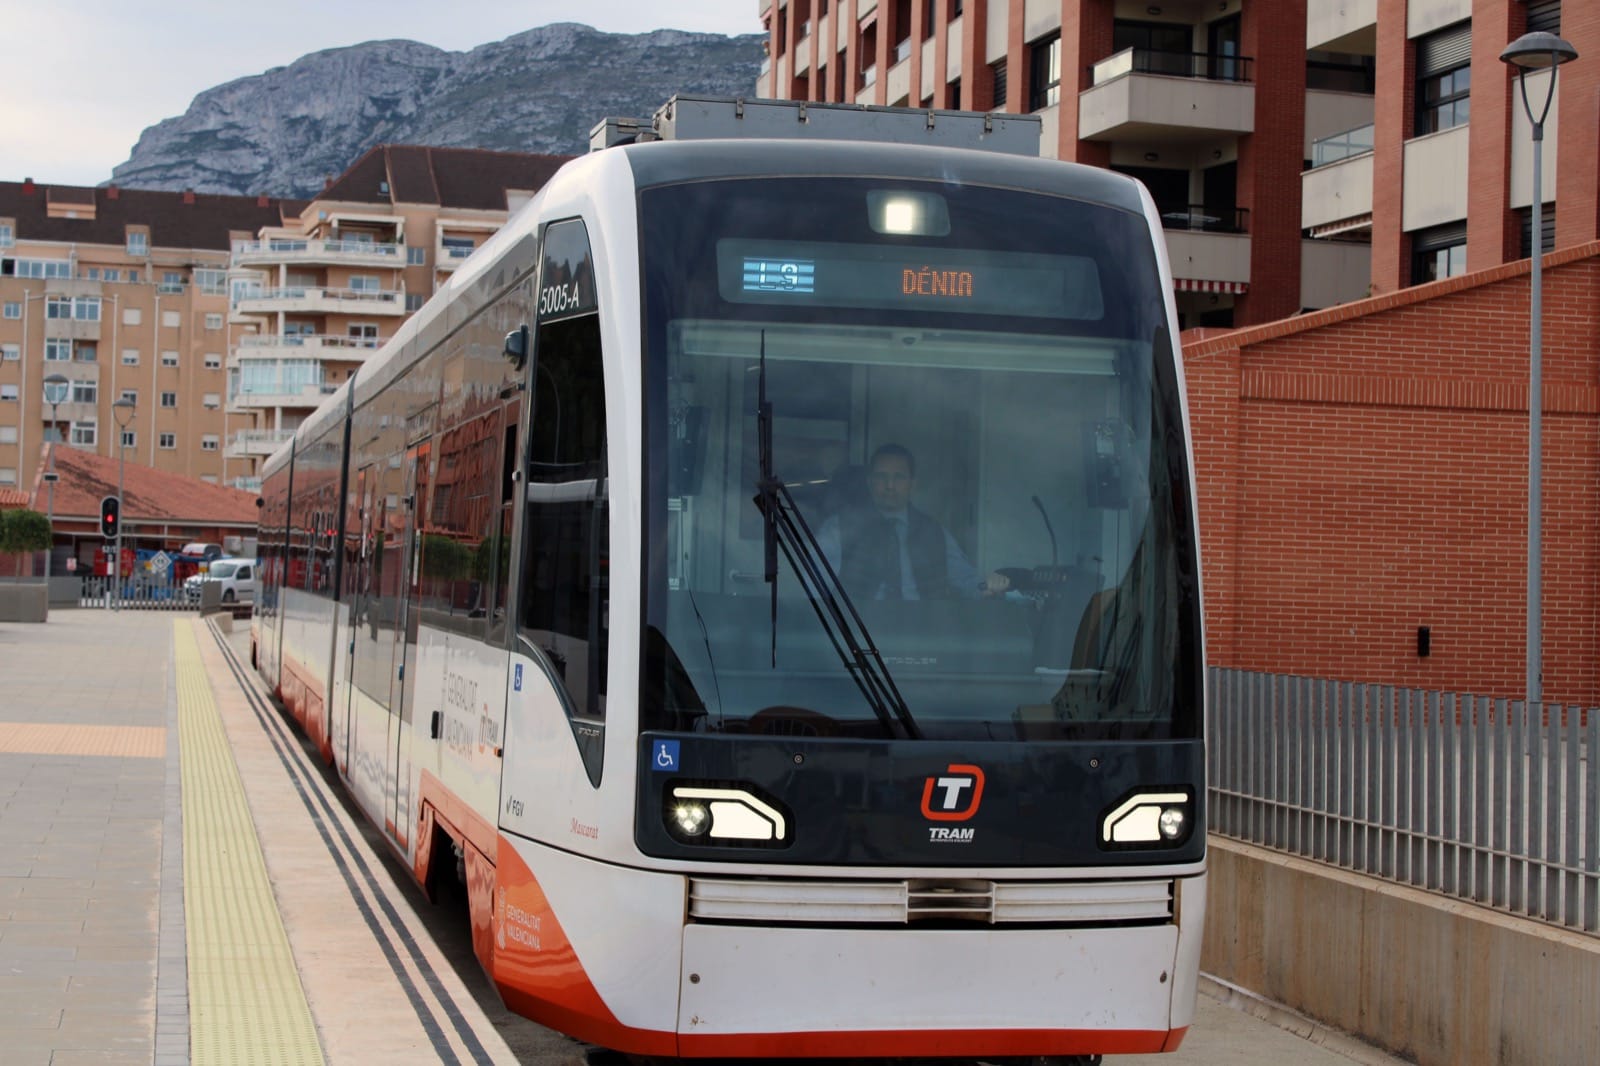 Tram Line Return Moves Forward After Nearly Half A Century 'off The Rails' For Costa Blanca Area Of Spain